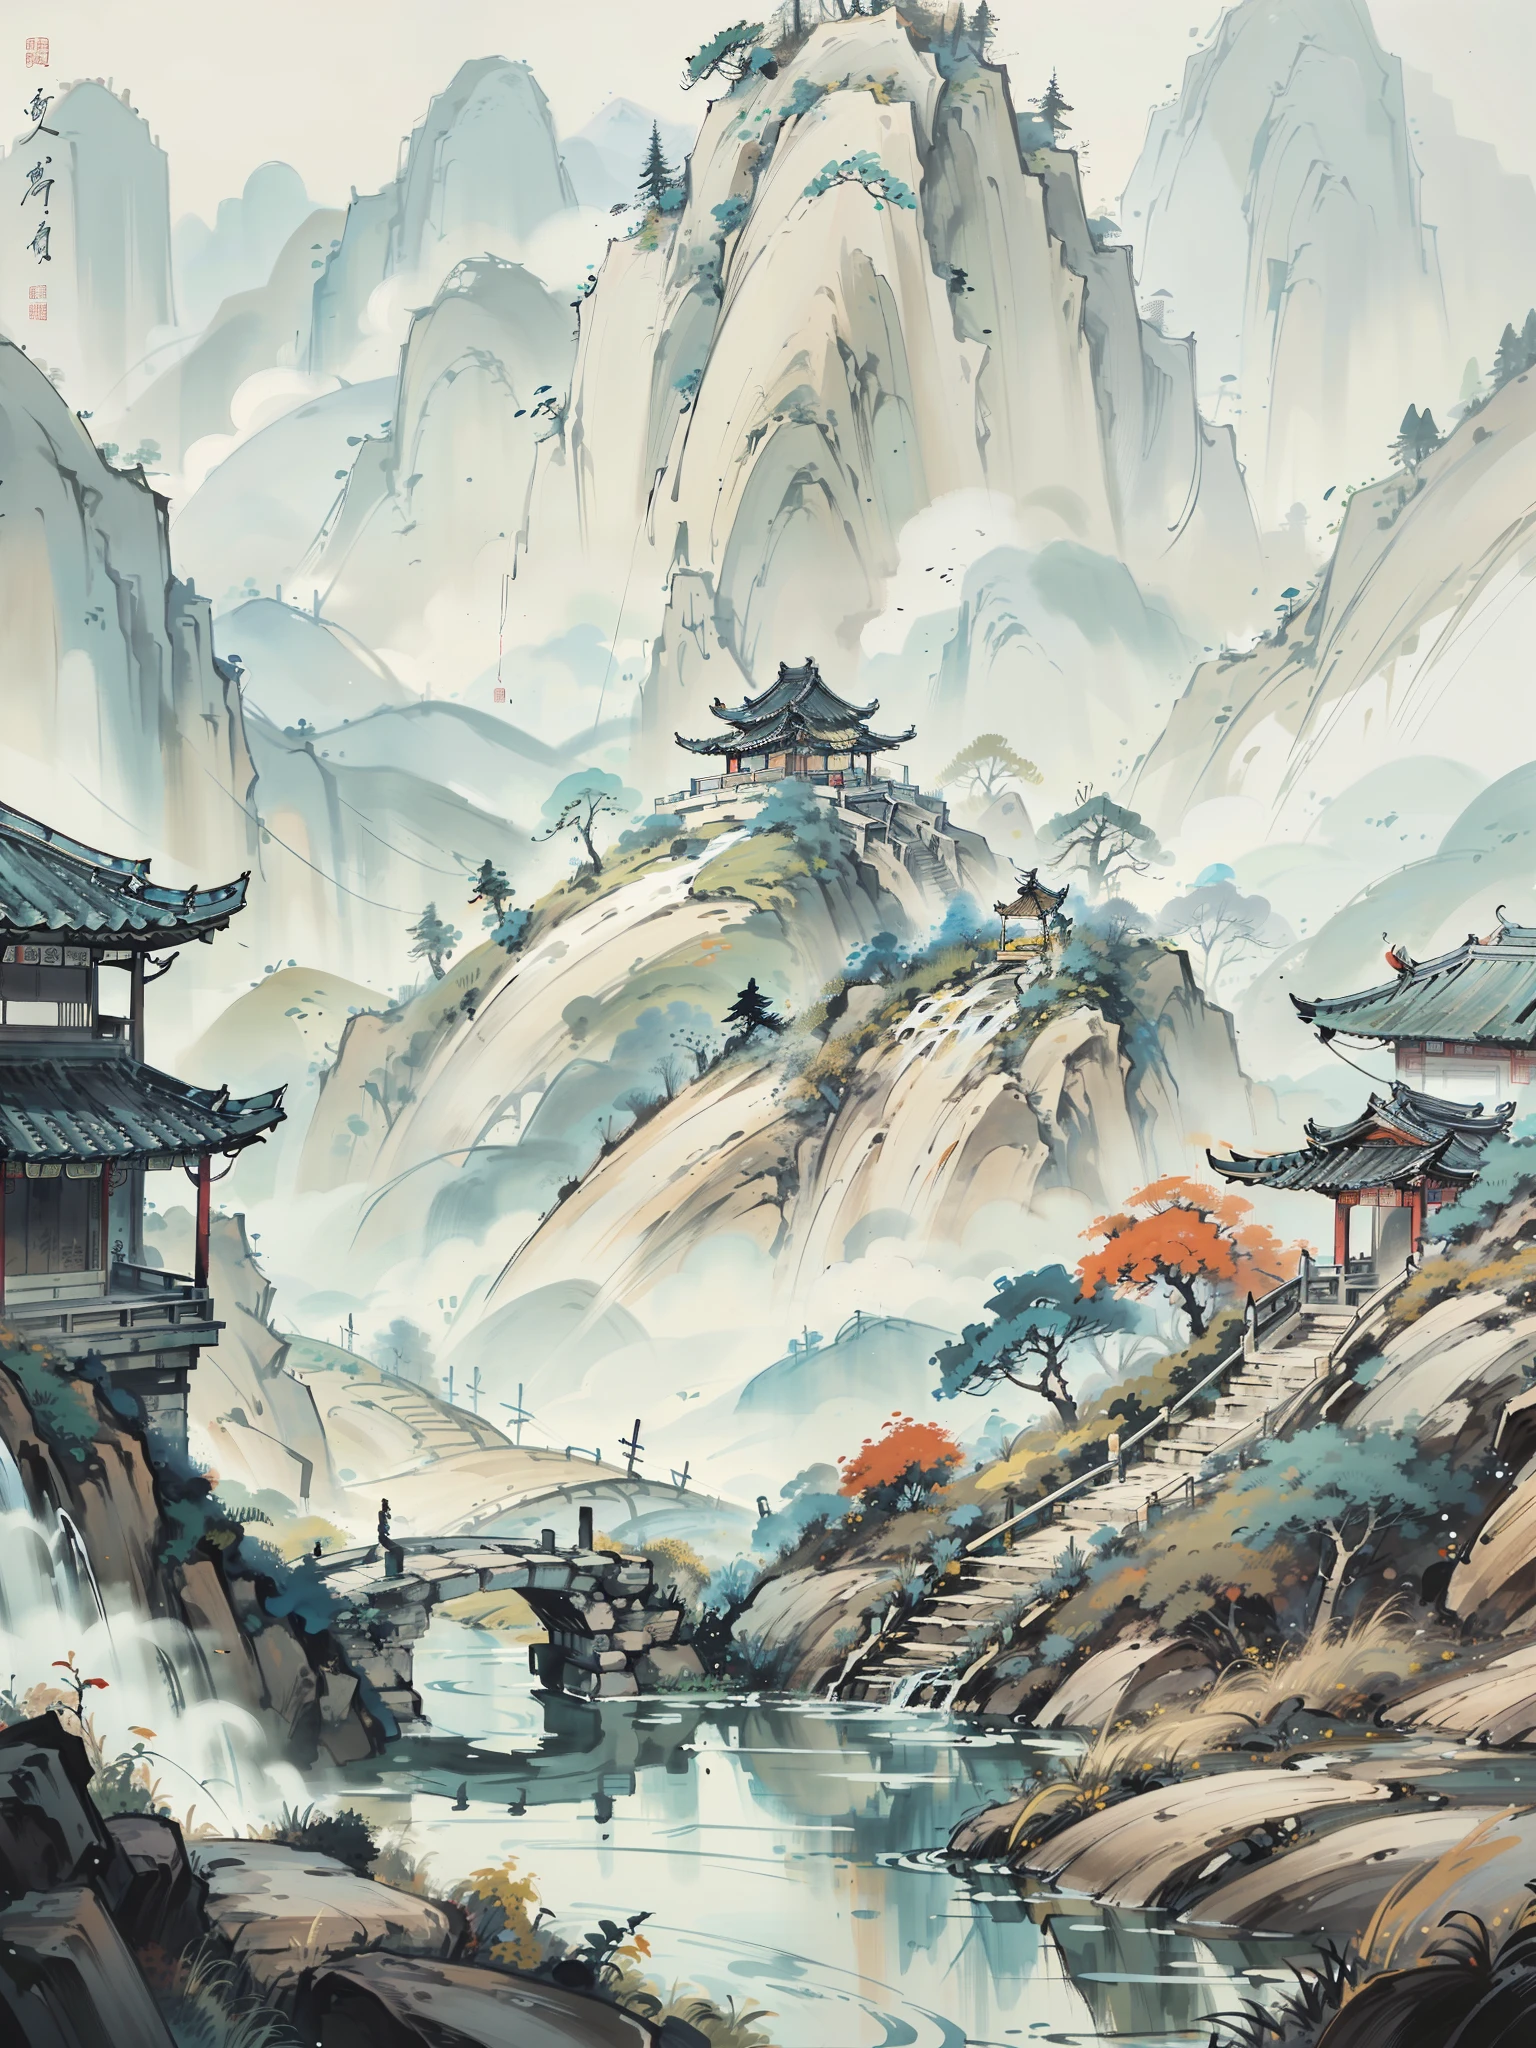 (Best Masterpiece), 8K, 
(Chinese ancient painting style), (distant view shot),The camera glides through a bamboo forest and reveals an ancient Chinese garden nestled among the mountains and forests,Multiple traditional Chinese buildings are scattered throughout the landscape, including high mountain waterfalls, pavilions perched on cliffs in the distance, ponds with small flowing bridges, lush trees with abundant branches and leaves,
The natural lighting is exquisite against a backdrop of blue sky and clouds, creating a beautiful color tone,